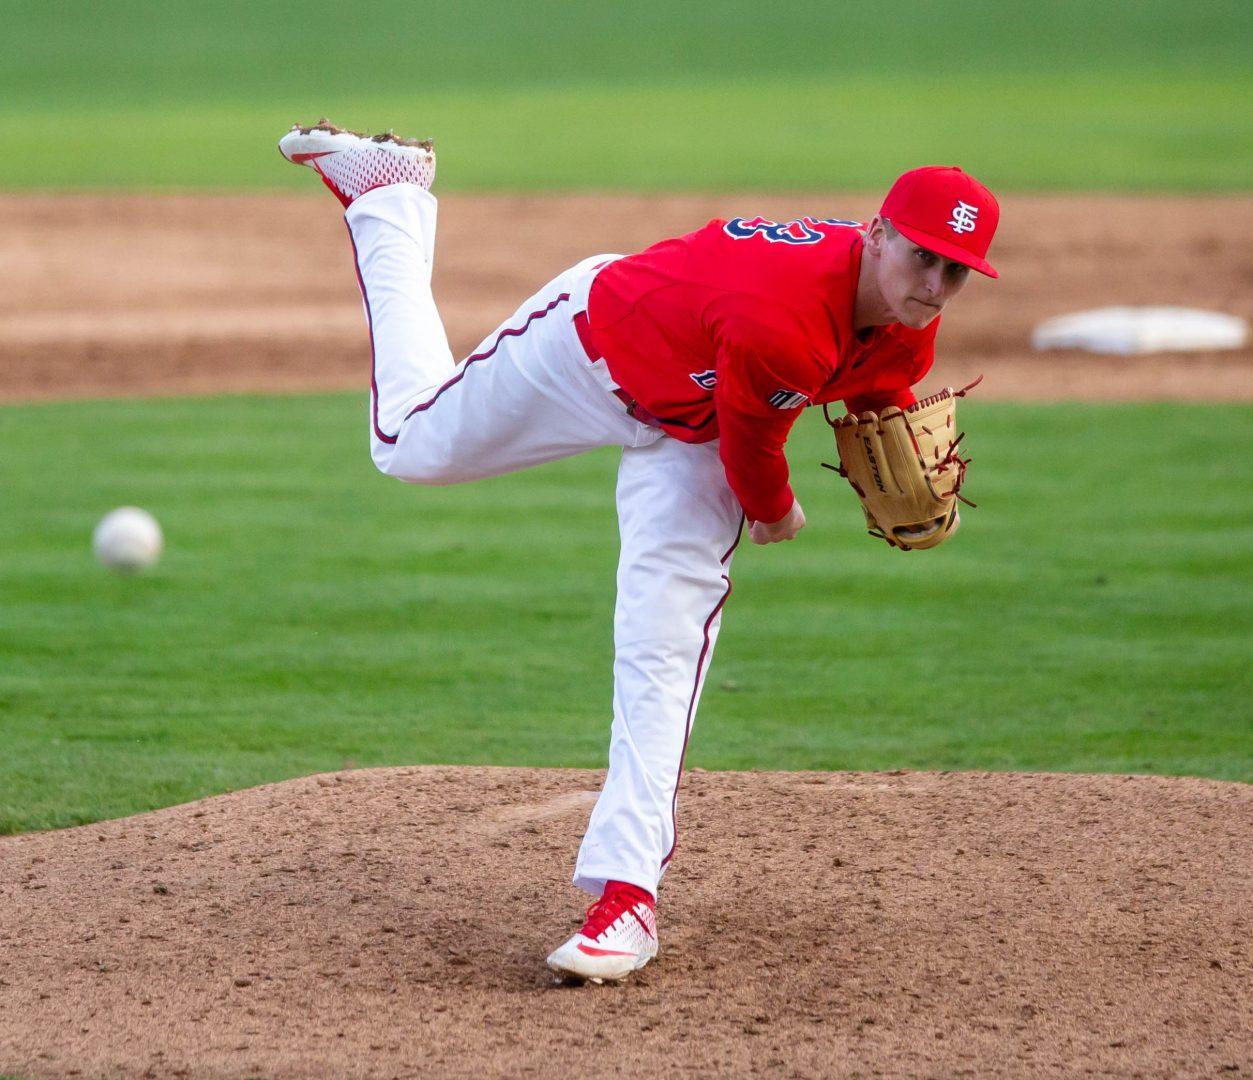 +Fresno+State%E2%80%99s+Kyle+Pruhsmeier+throws+a+pitch+during+the+Fresno+State+alumni+game+at+Peter+Beiden+Field+on+Saturday+Feb.+9%2C+2019.+%28Jose+Romo+Jr.%2FThe+Collegian%29.